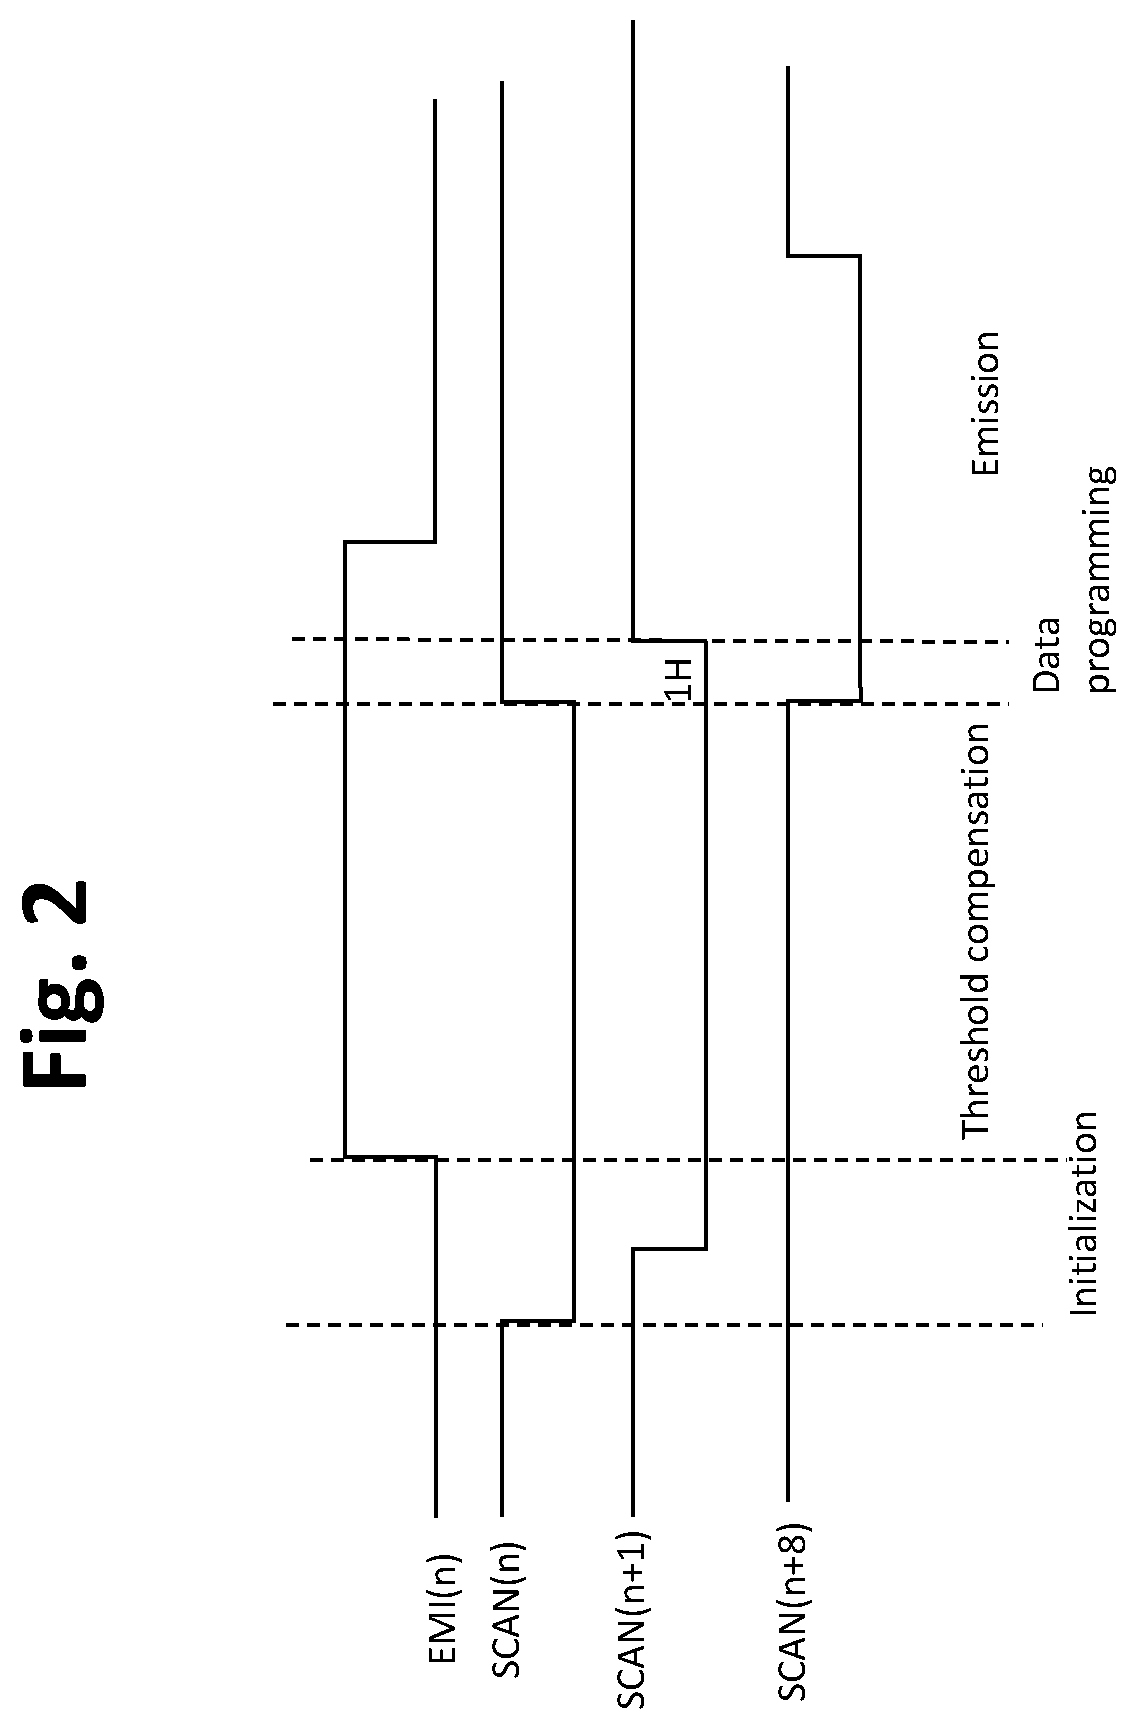 TFT pixel threshold voltage compensation circuit with short programming time